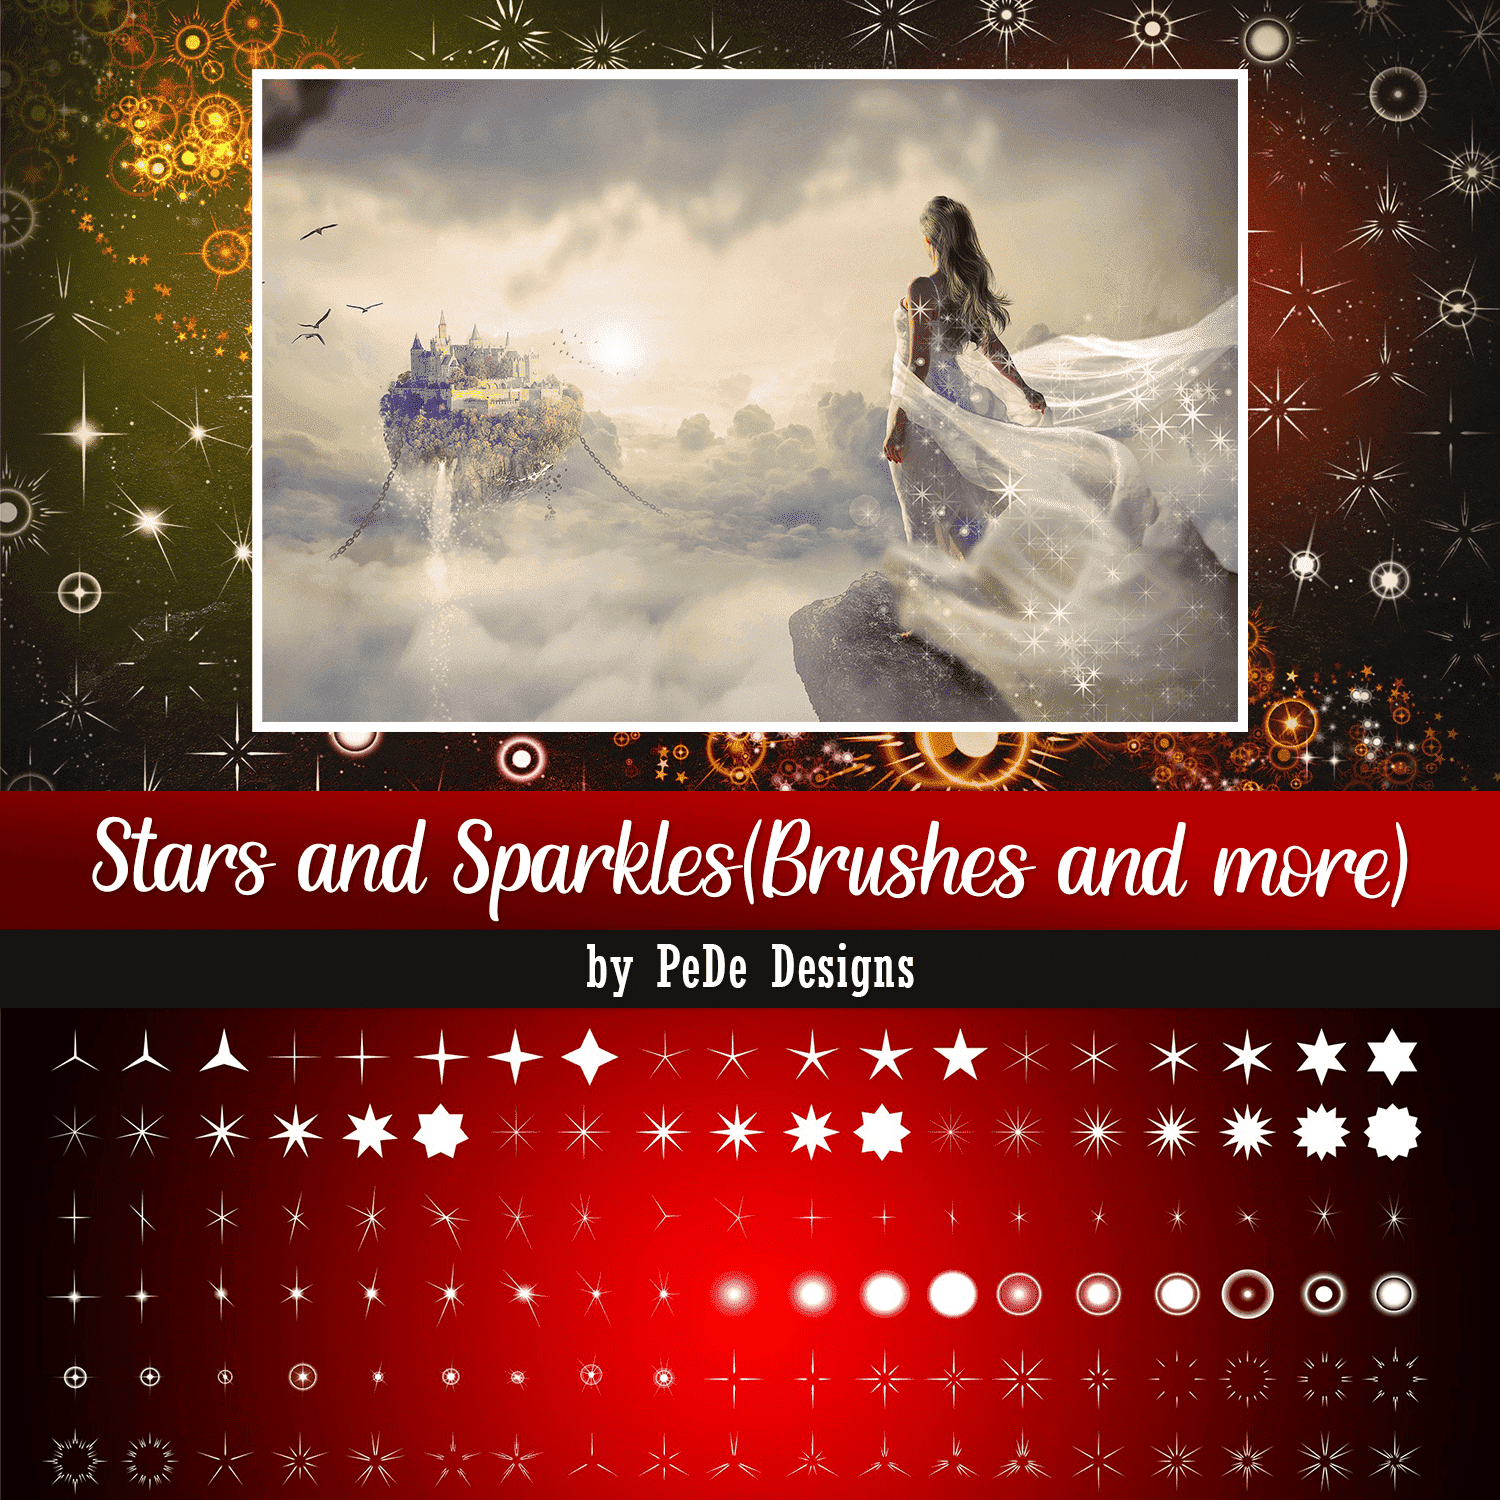 Stars and sparkles brushes and more, main picture 1500x1500.